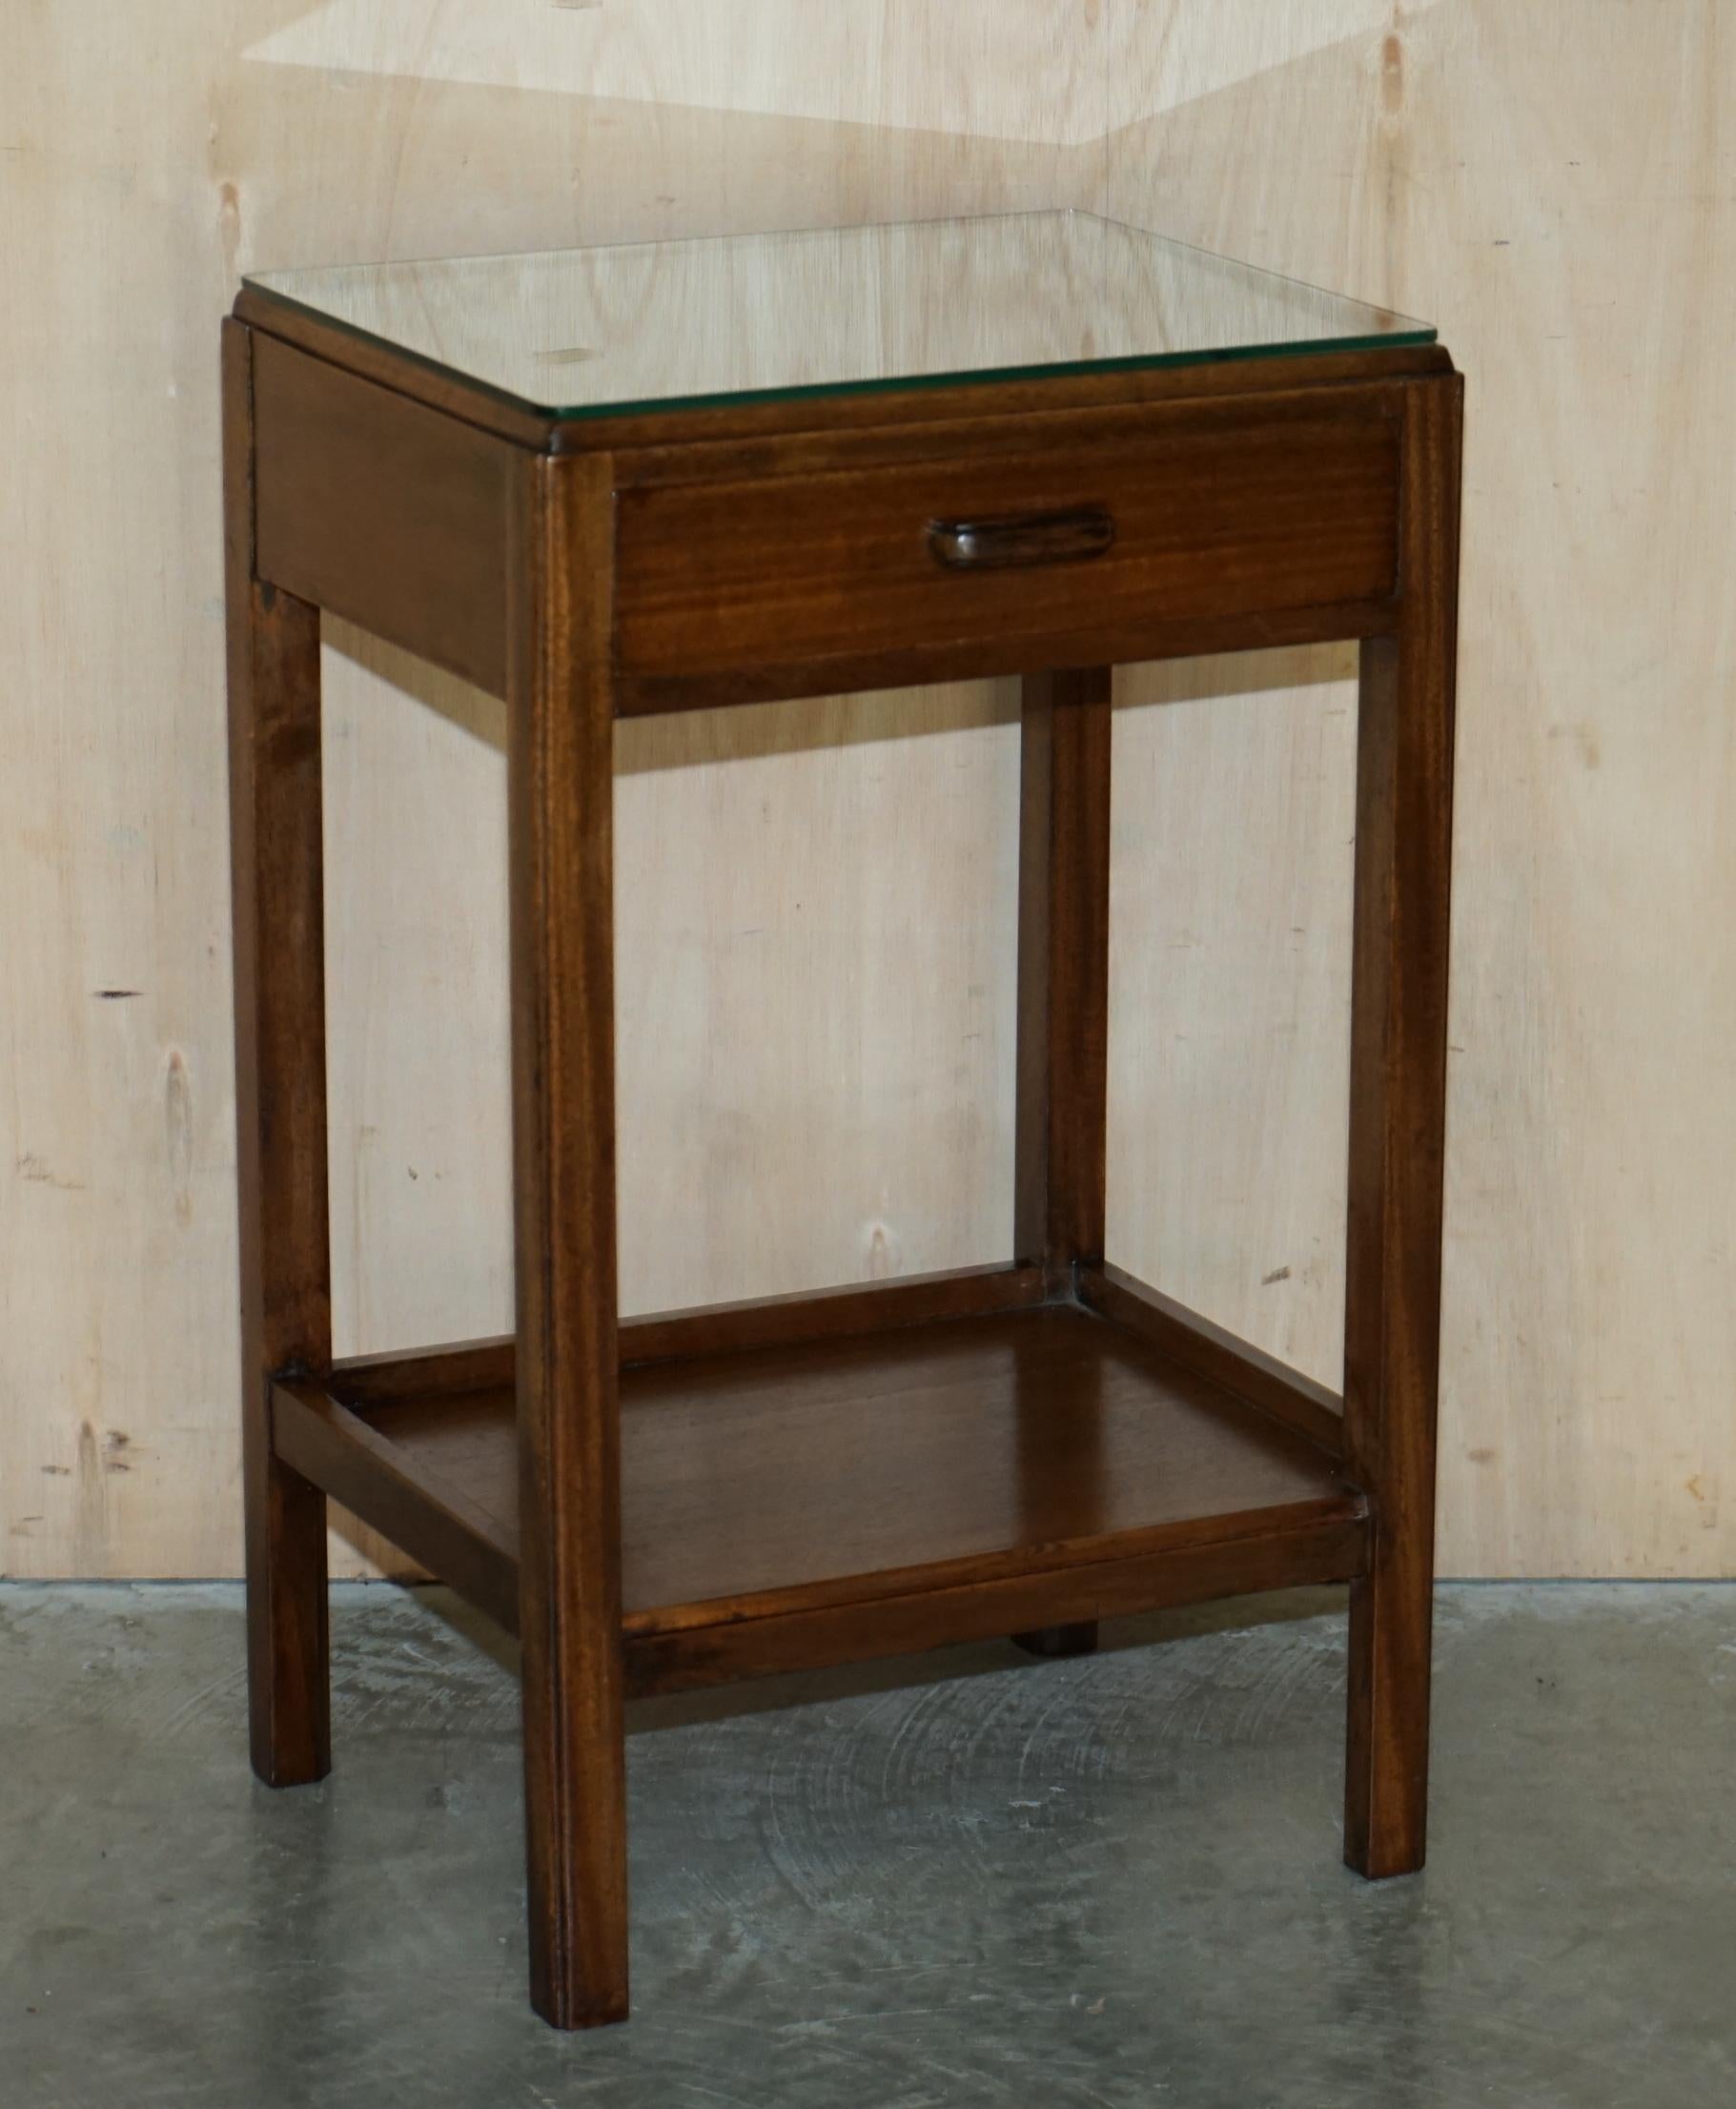 Hand-Crafted Pair of Tall Moss Partners 1952 Mid-Century Modern English Oak Side End Tables